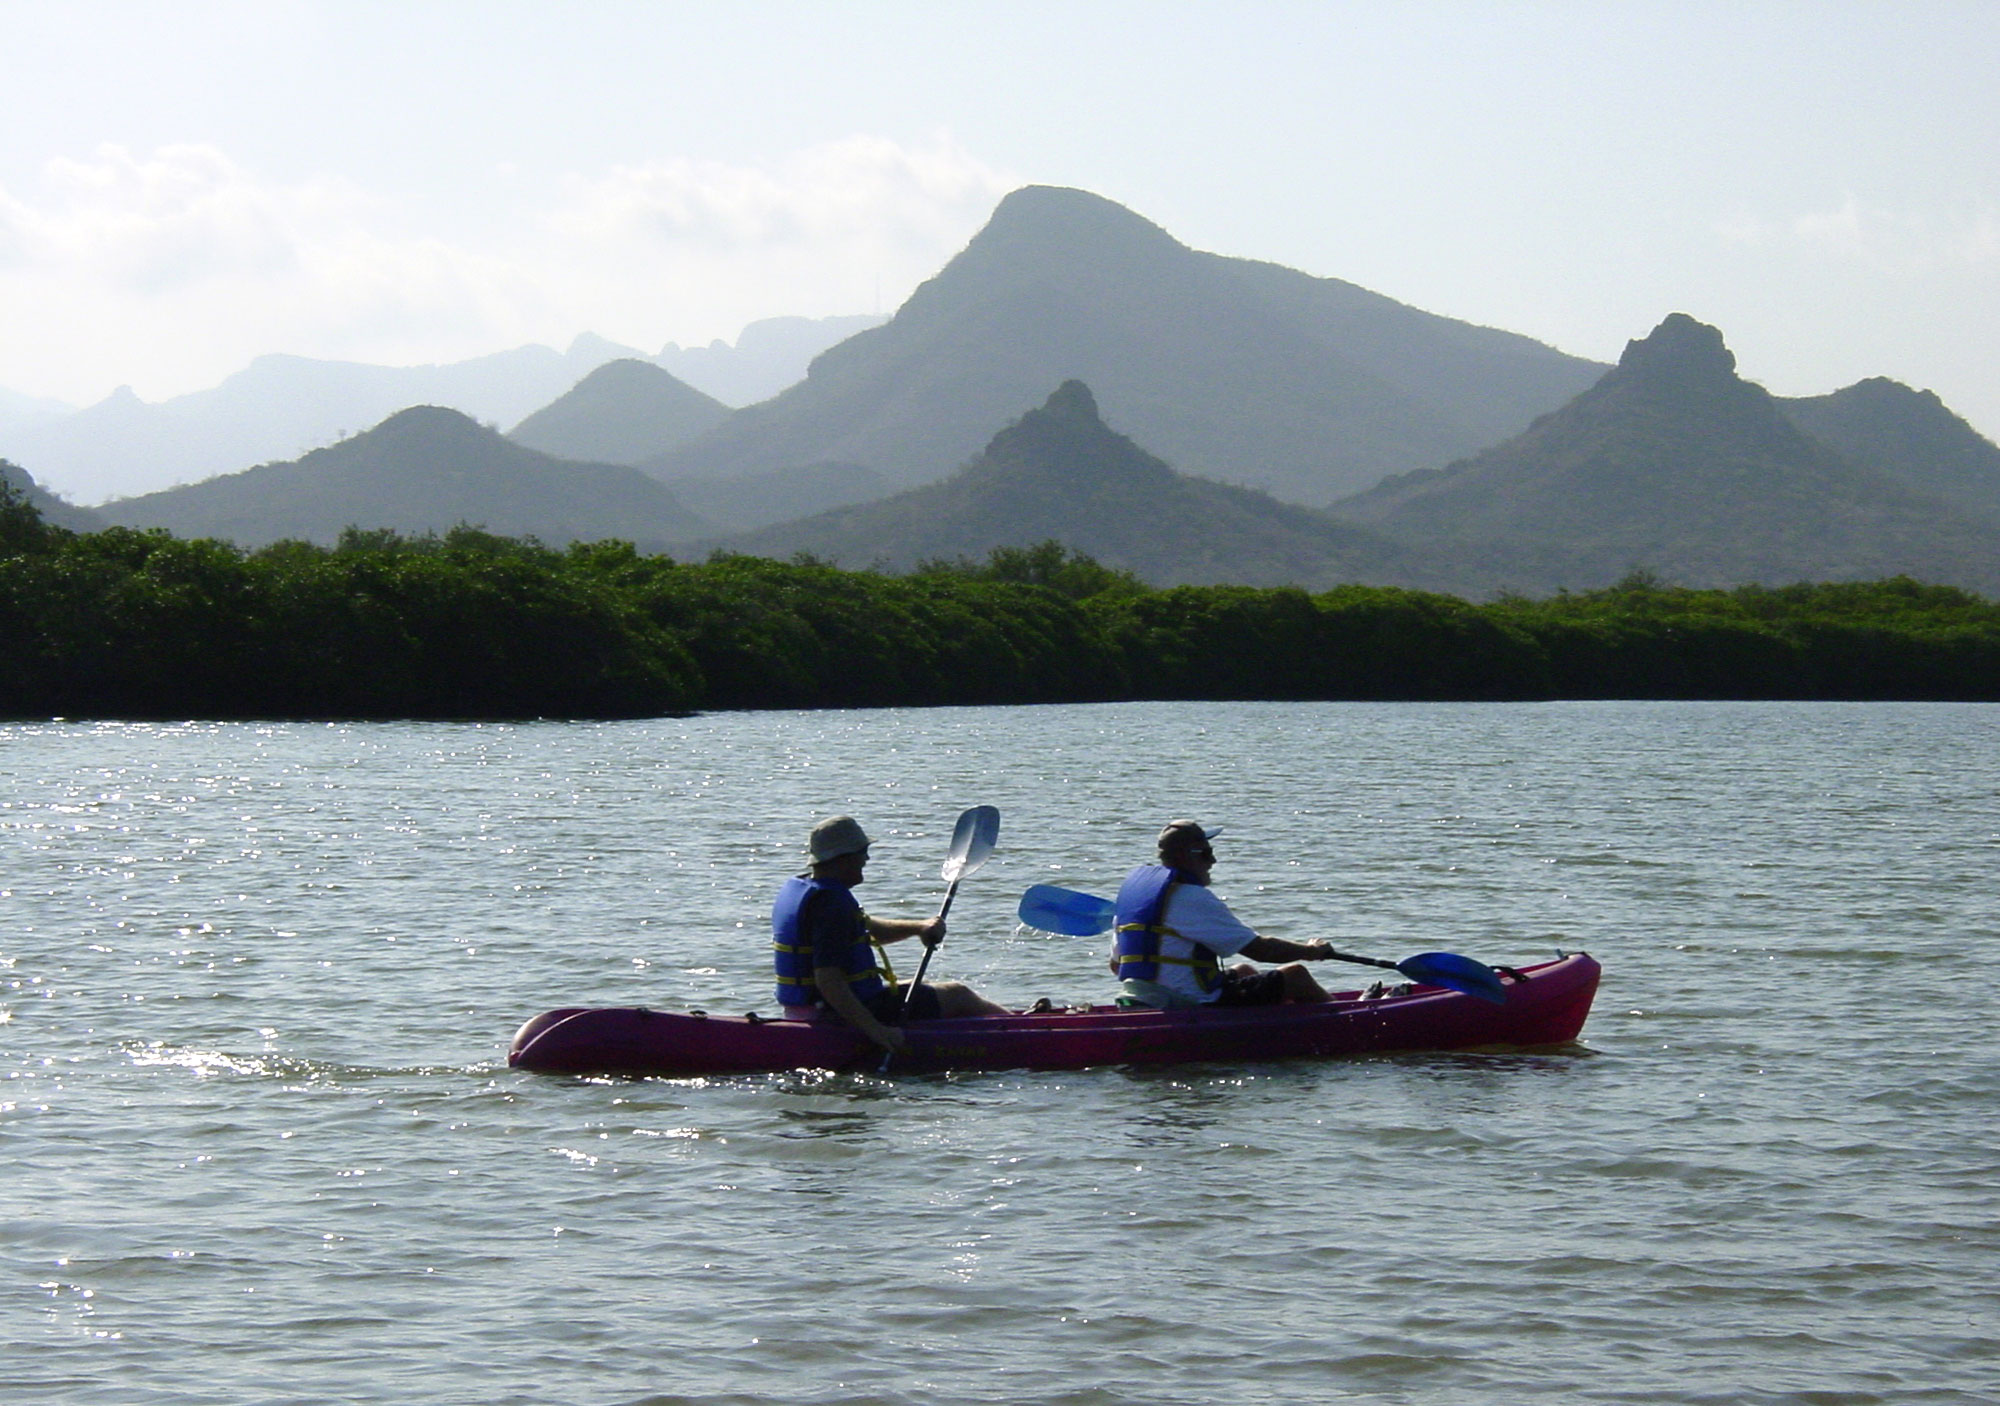 Dad and I kayaking in San Carlos, Mexico, a favorite family destination